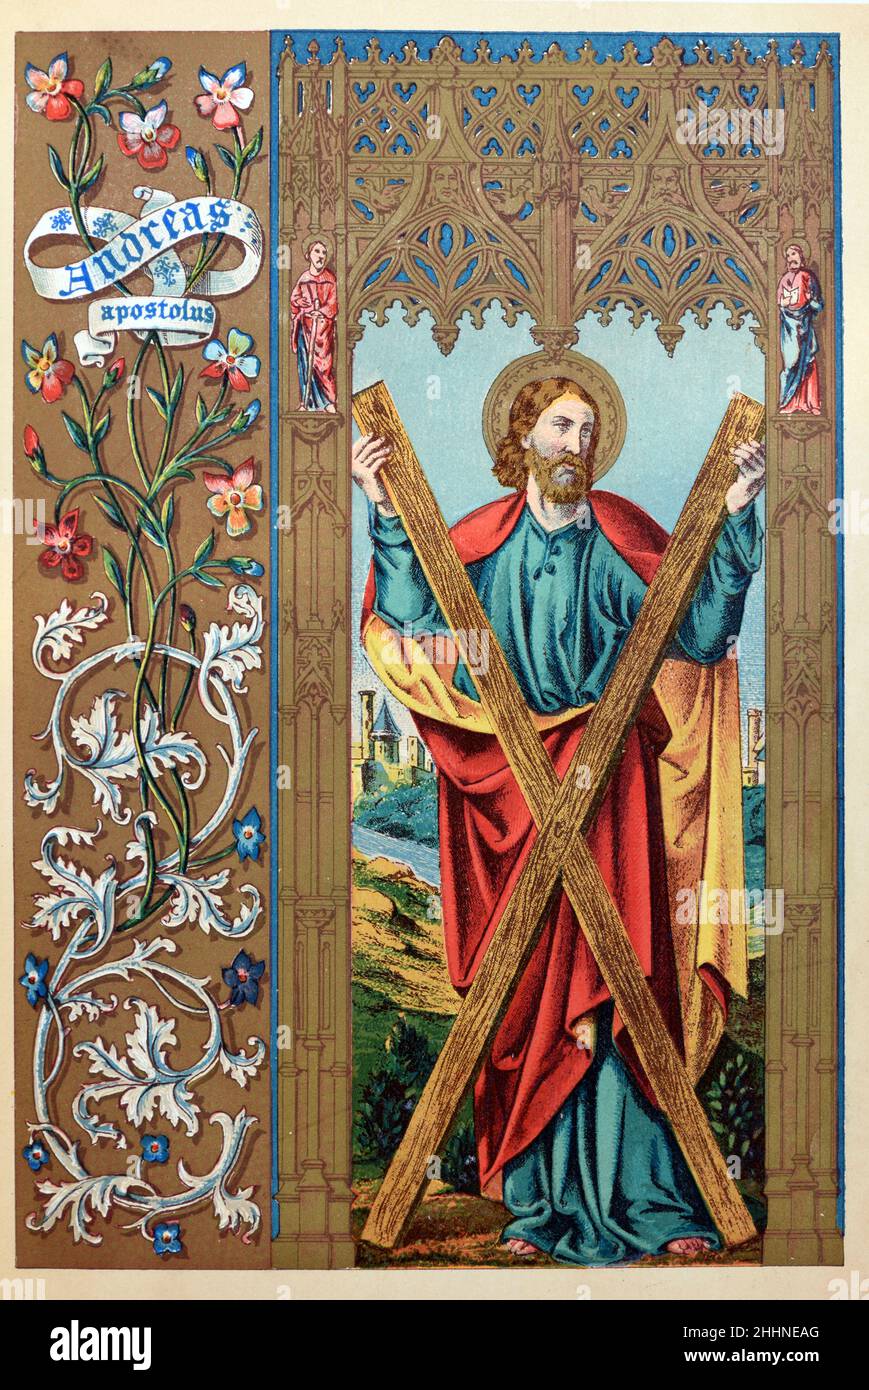 Saint Andrew the Apostle (AD5/10-60/70) with Planks Representing a Crucifix. Chromolithograph from 1887 Edition of Butler's Lives of the Saints. Stock Photo